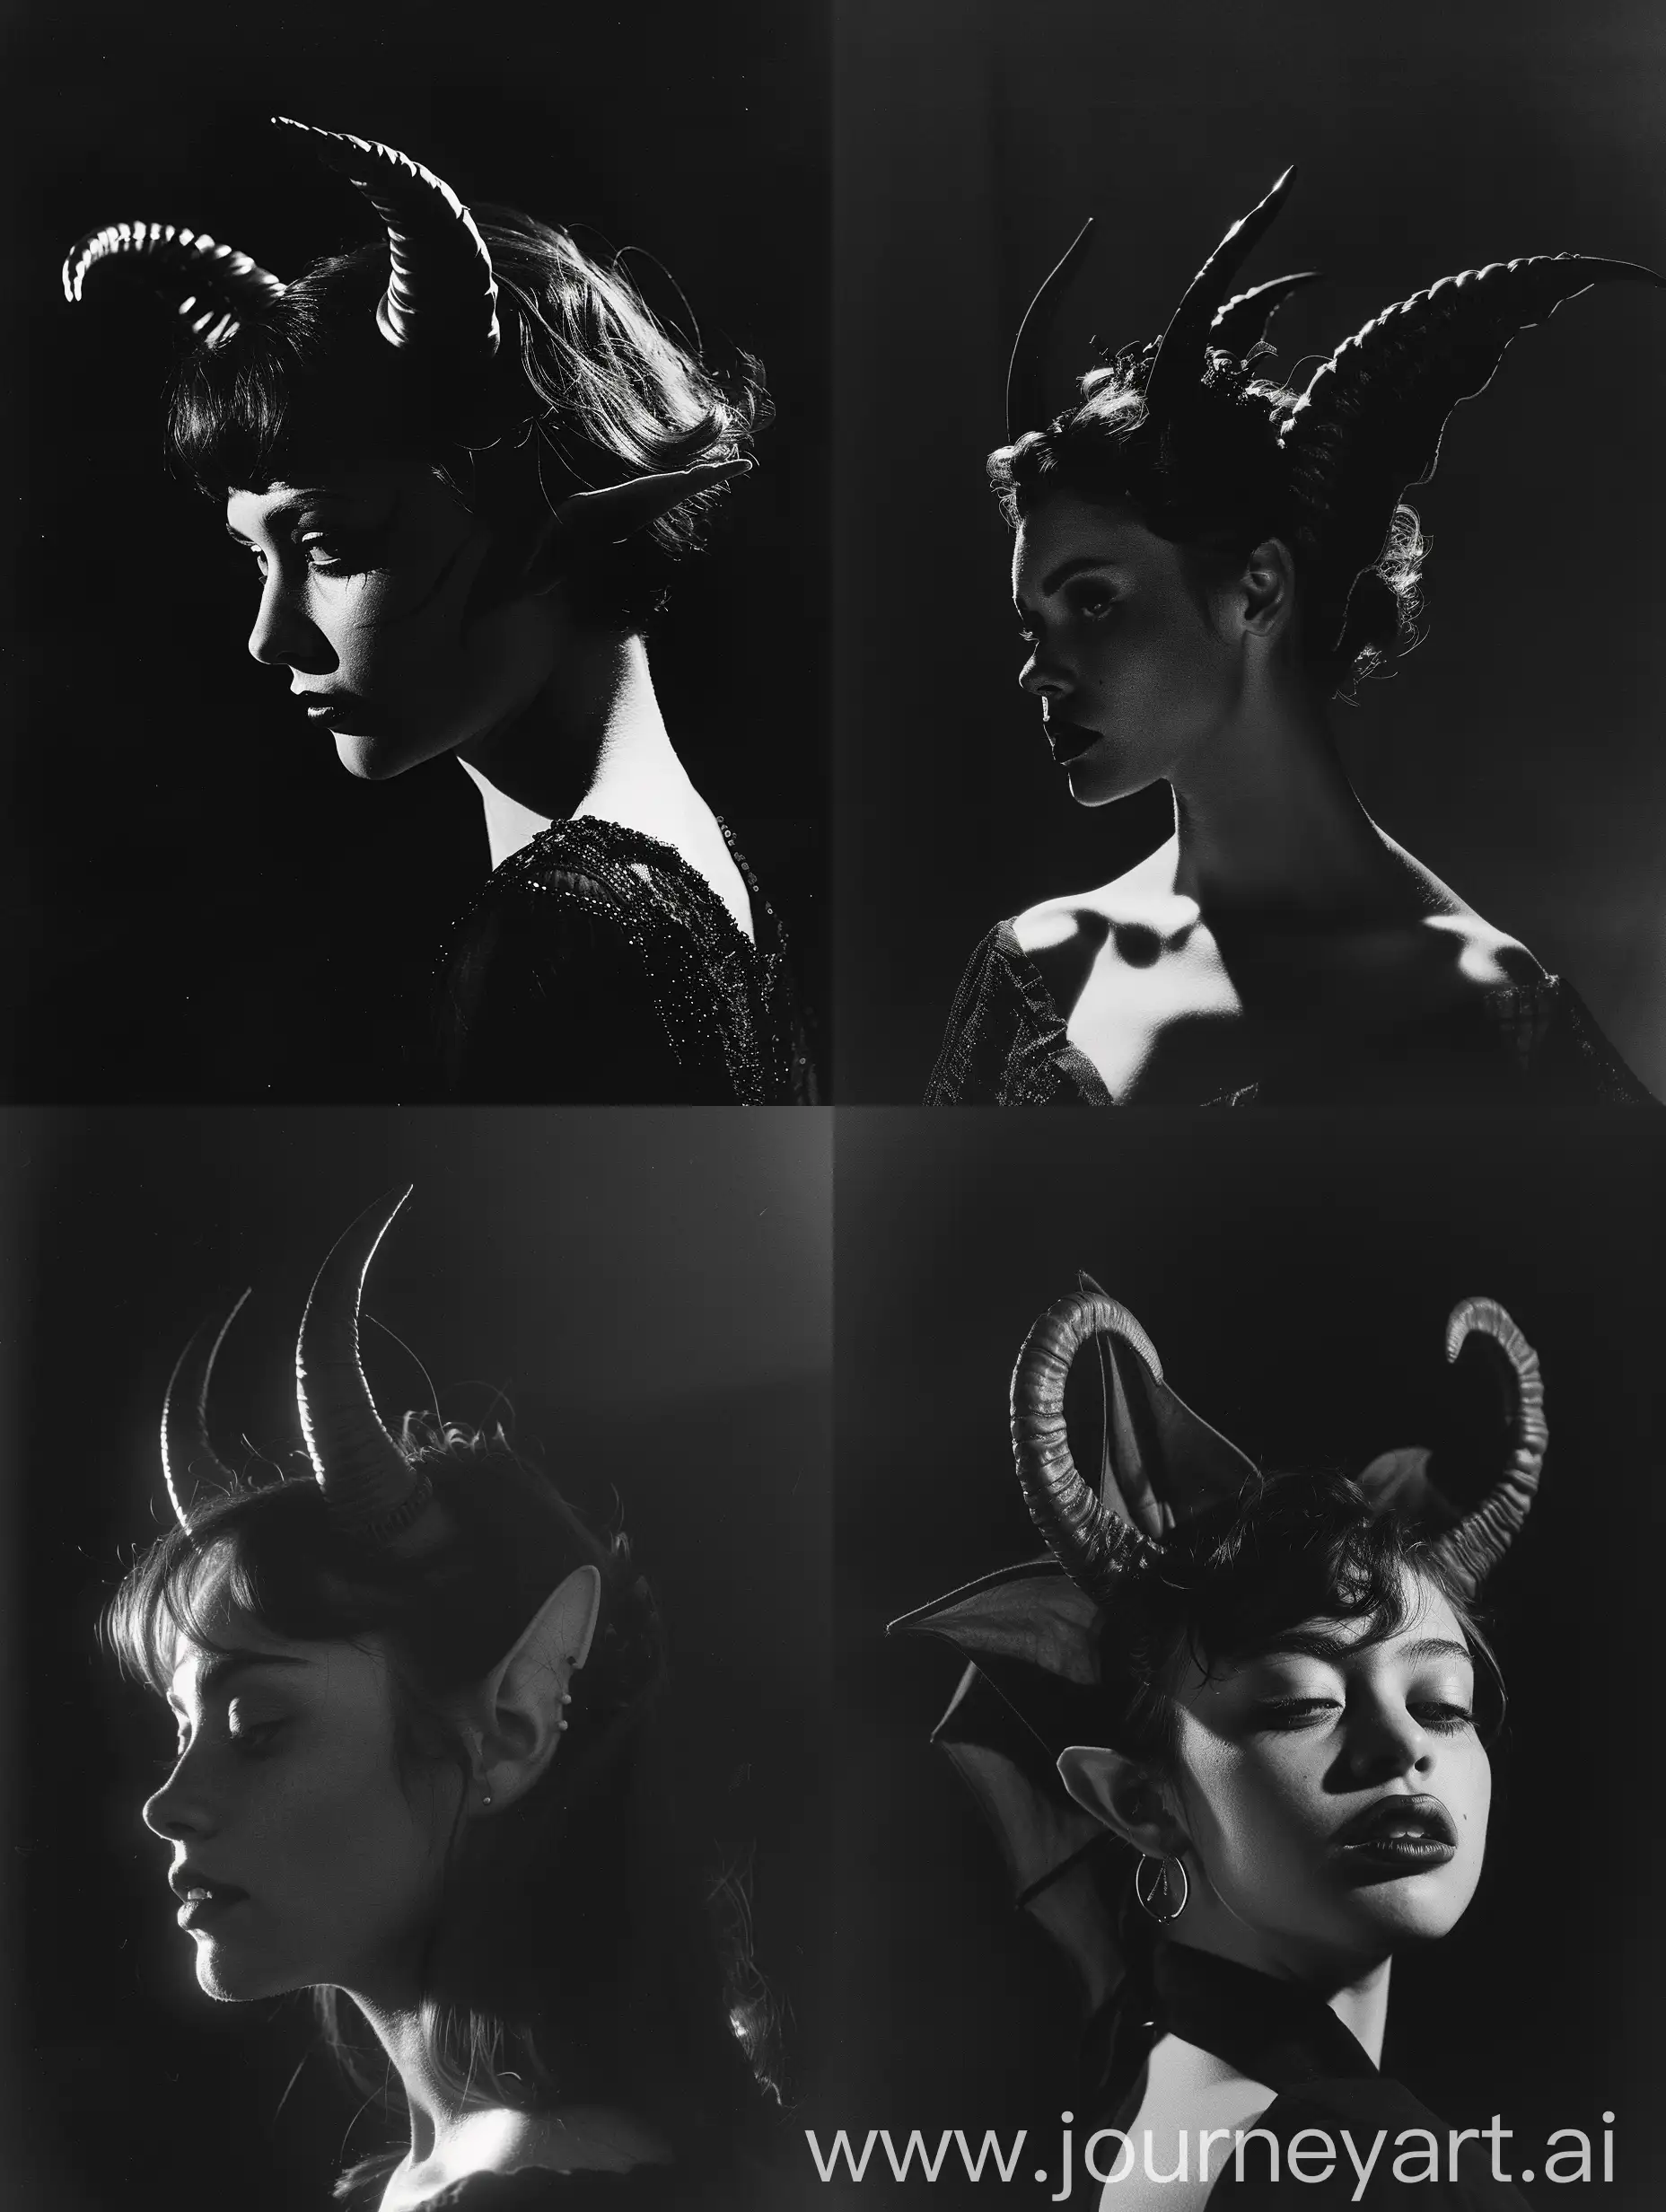 Grayscale-Portrait-of-a-Lady-Demon-with-Horns-on-Provia-Film